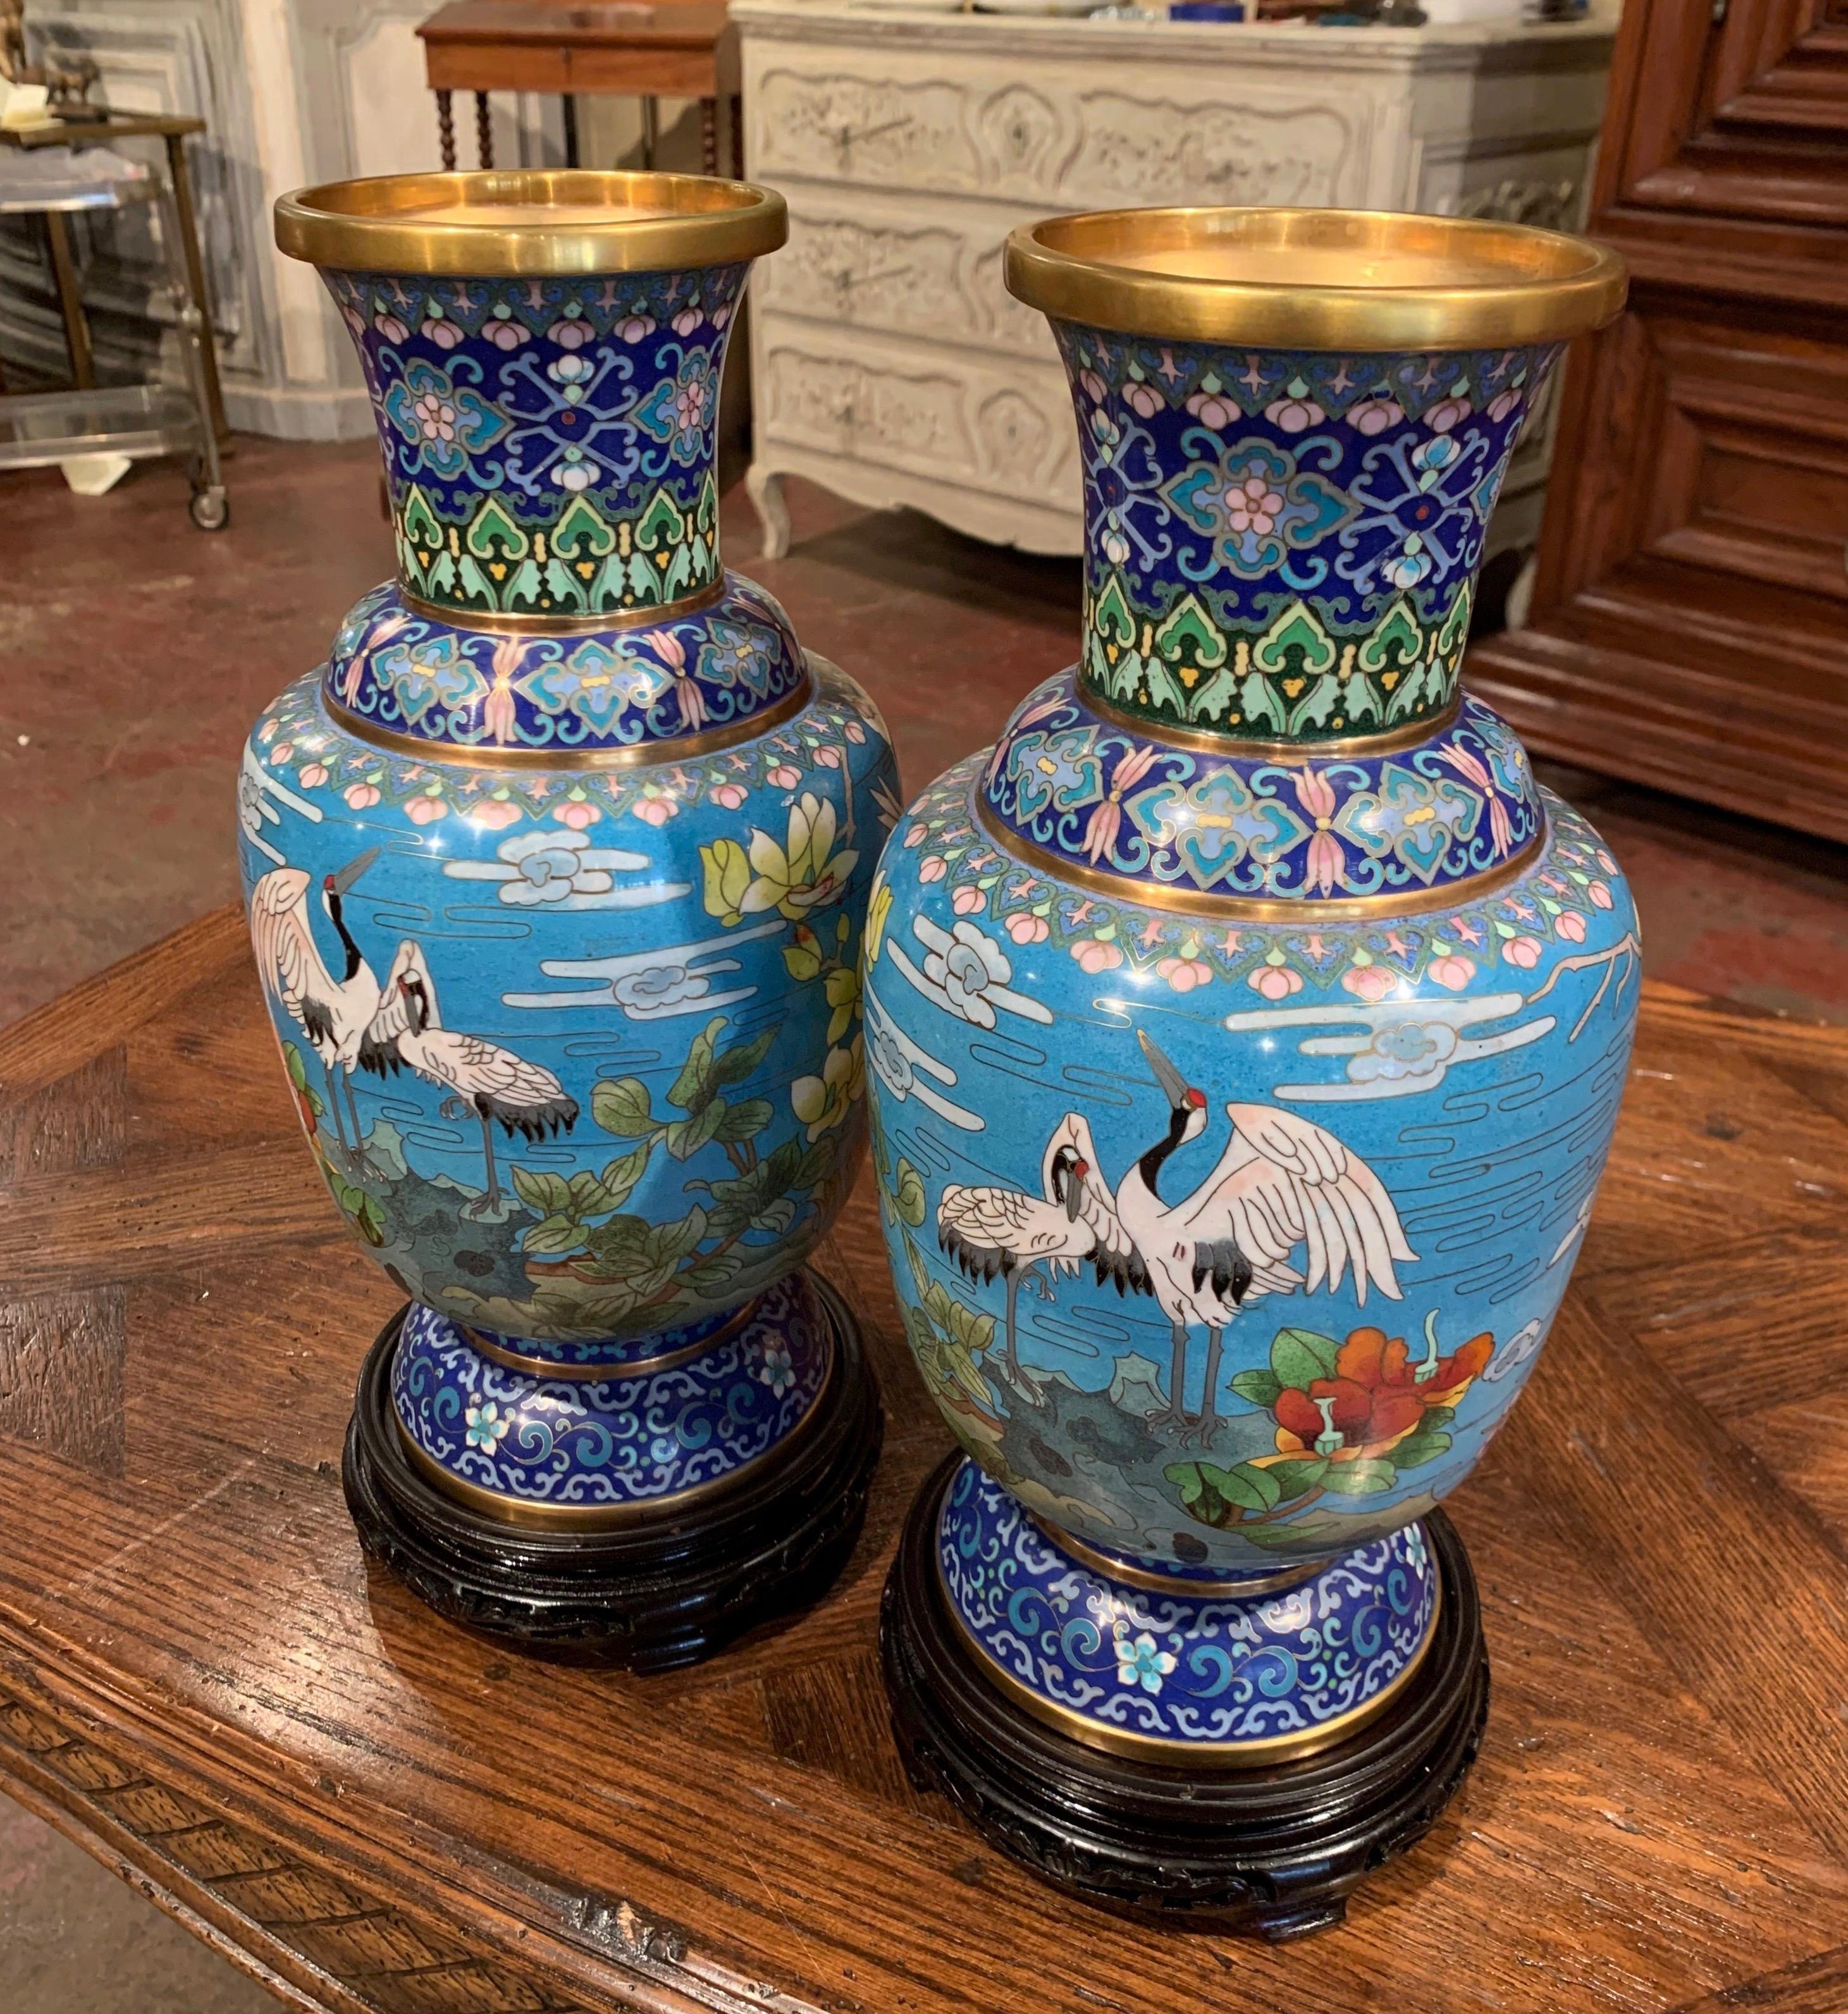 Cloissoné Pair of 20th Century Chinese Champlevé Enamel Vases on Stand with Bird Decor